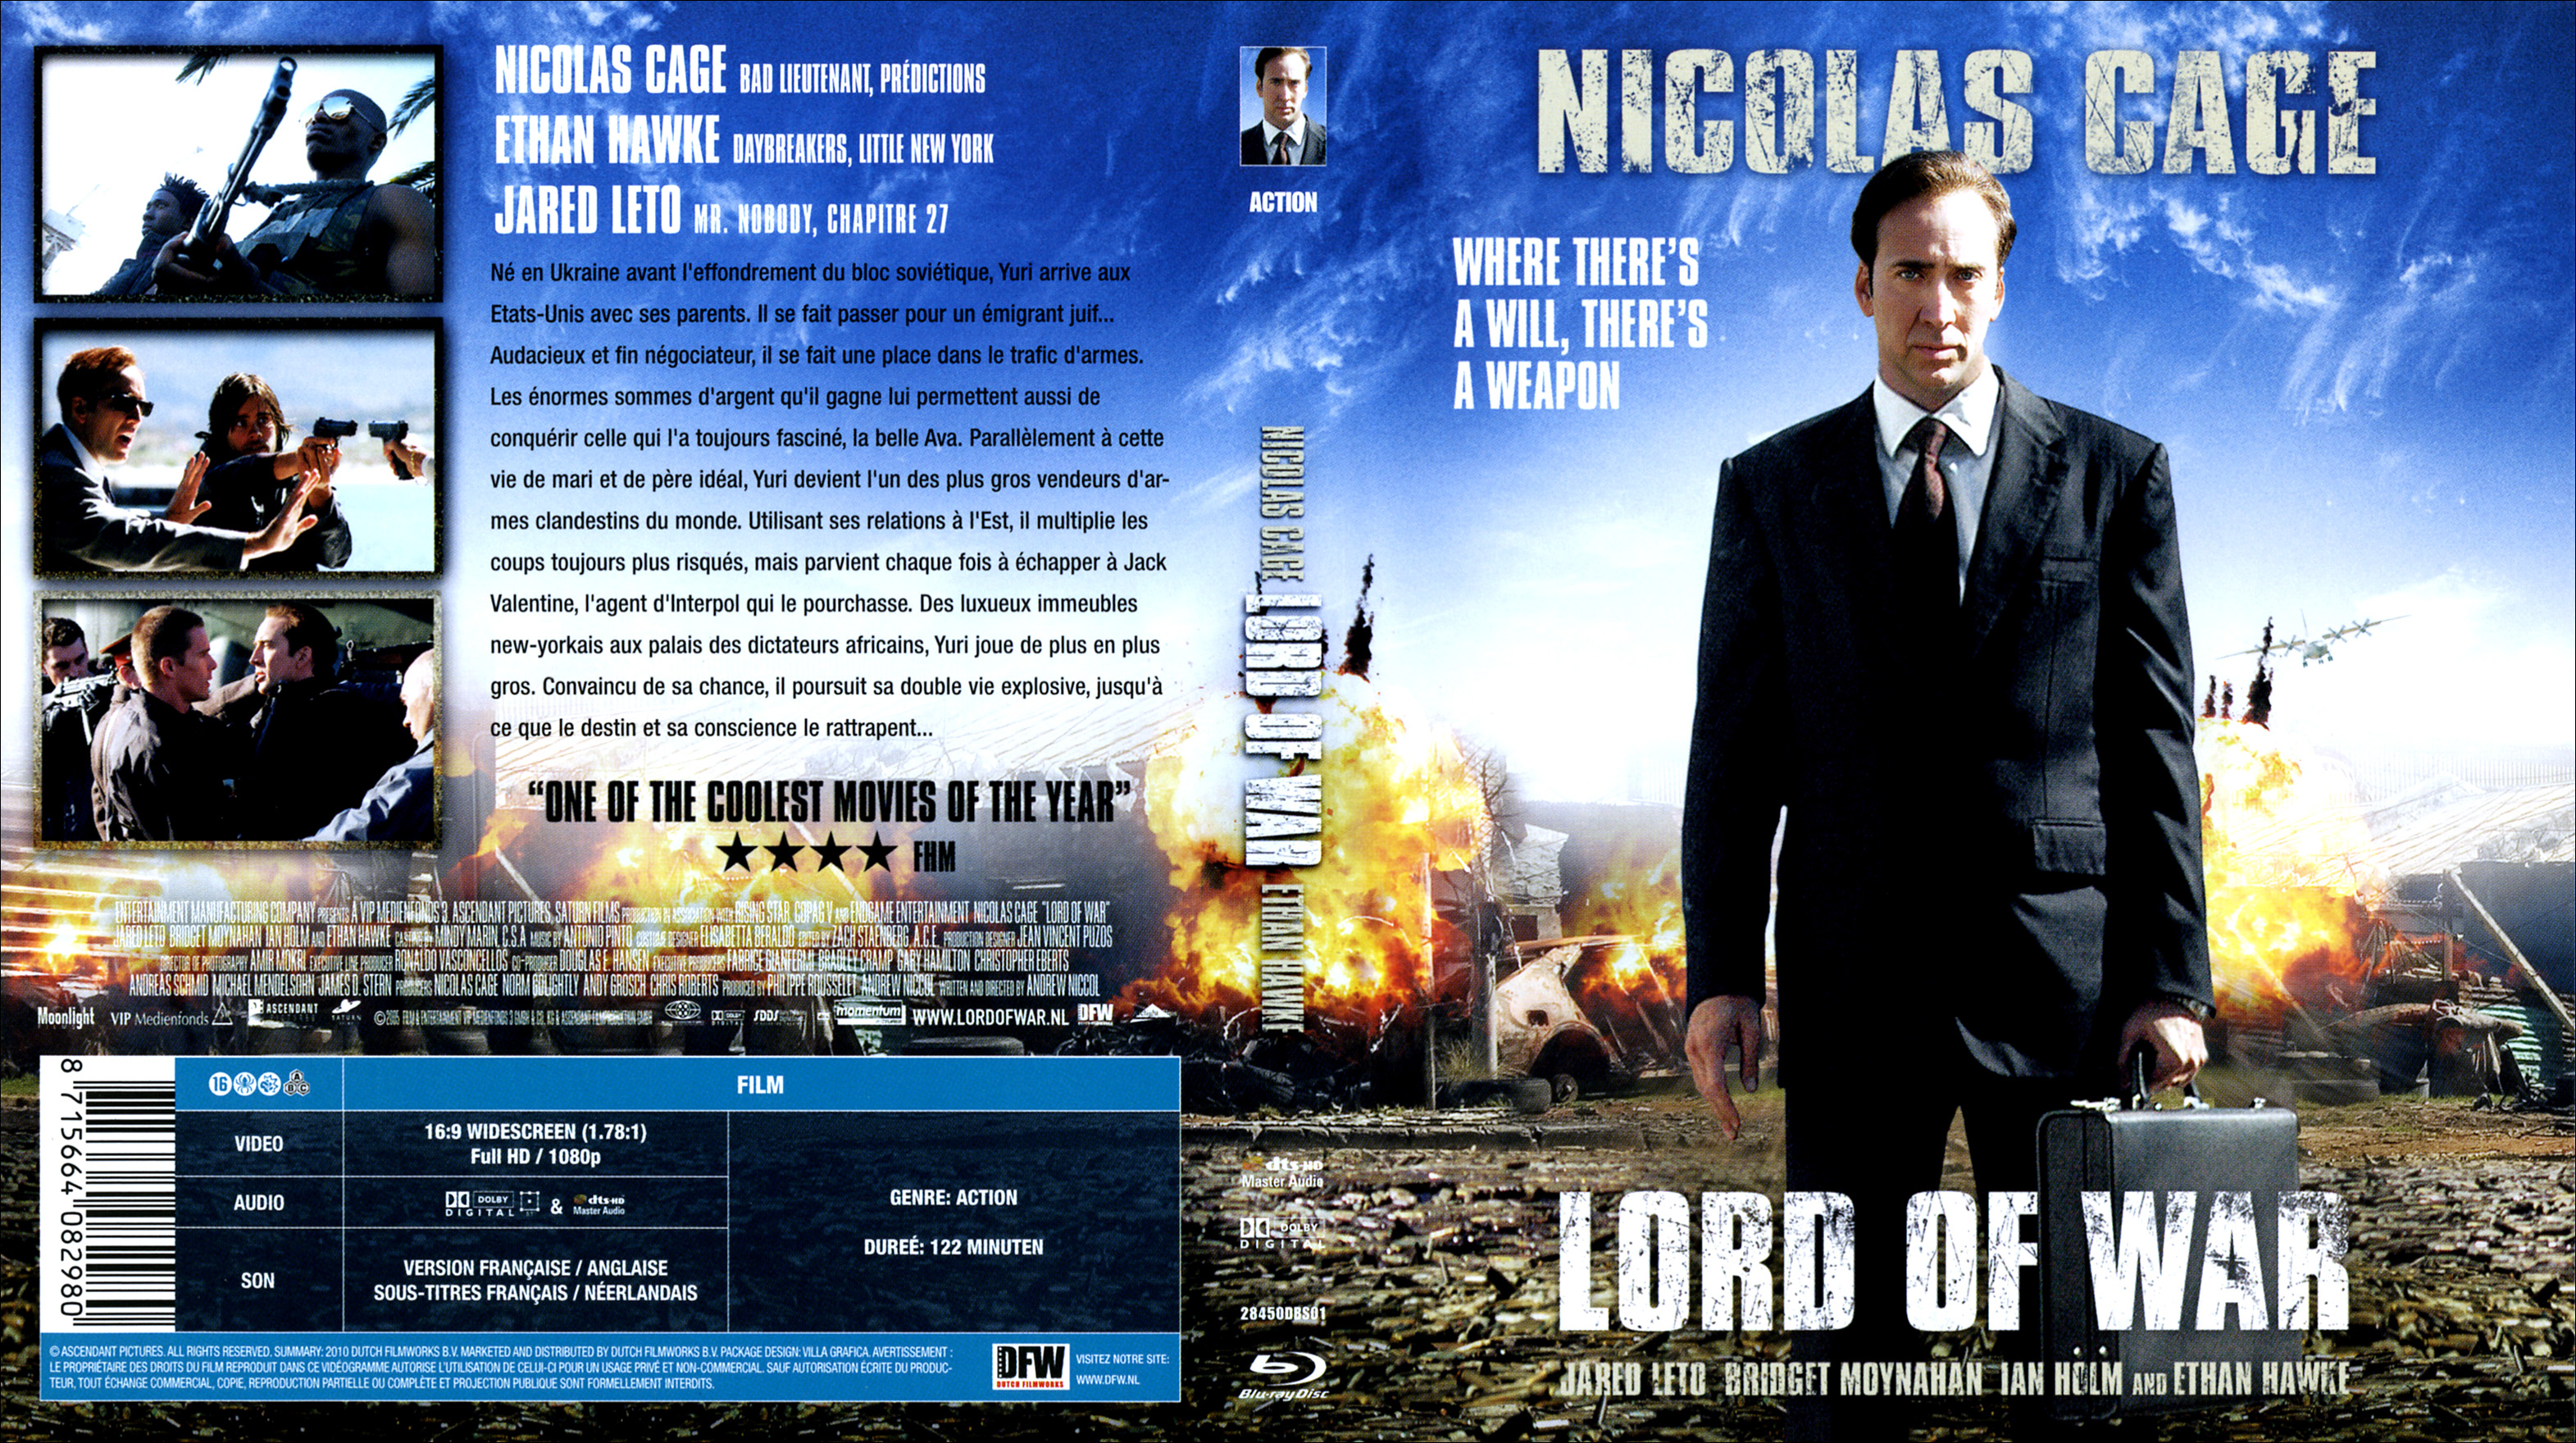 Jaquette DVD Lord of war (BLU-RAY) v2